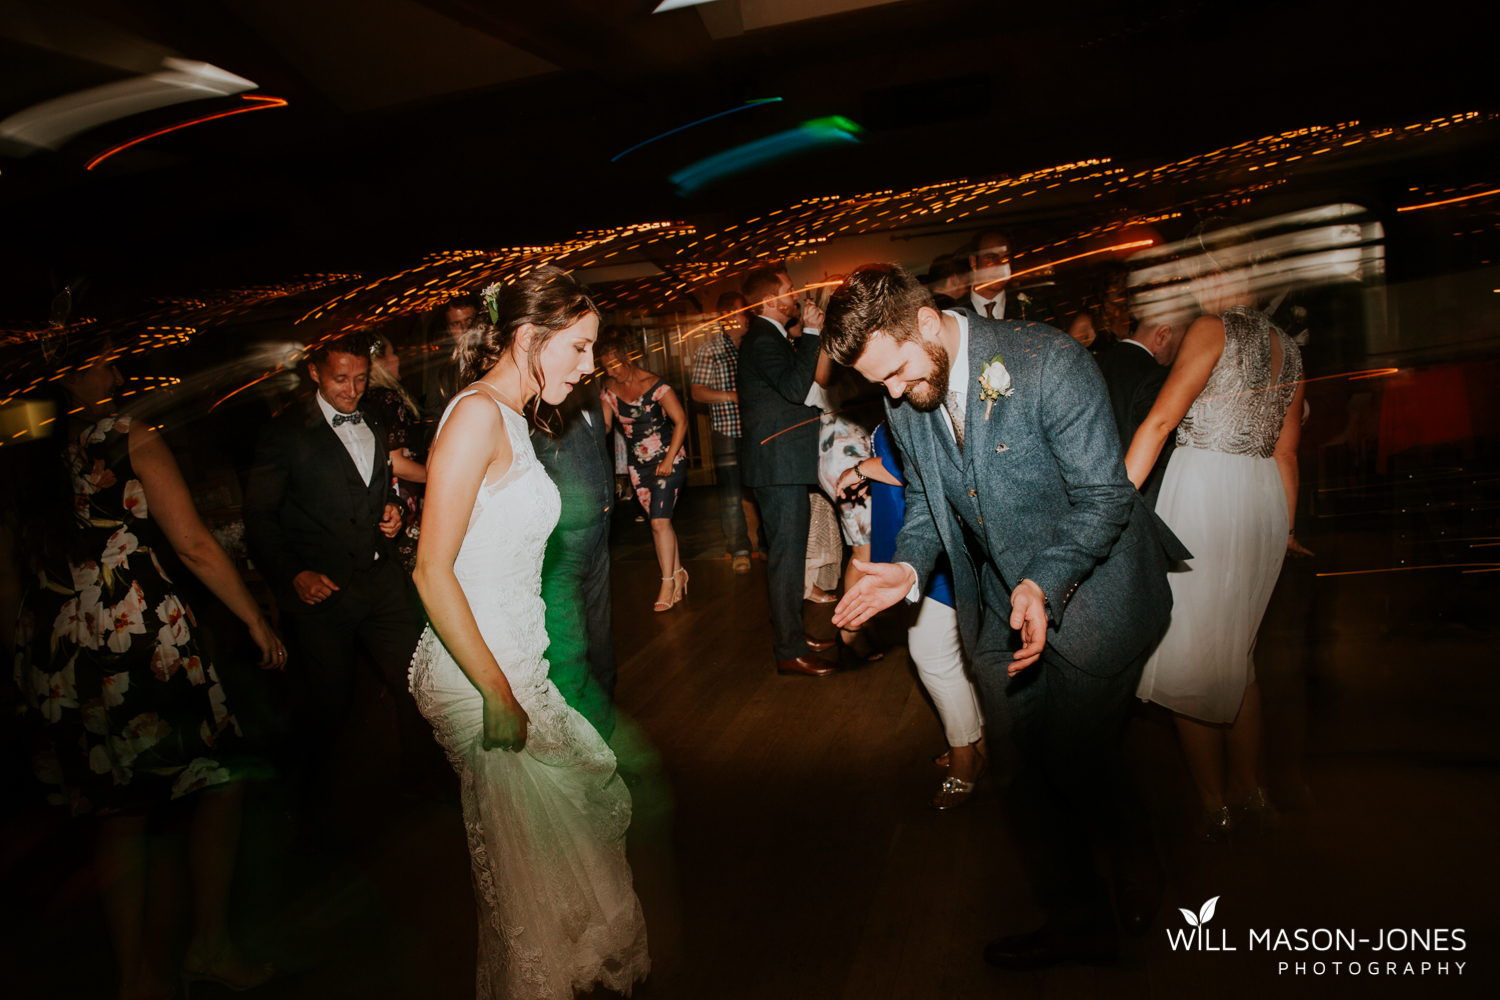  fun colourful and relaxed wedding dancefloor evening photography at king arthur hotel swansea 